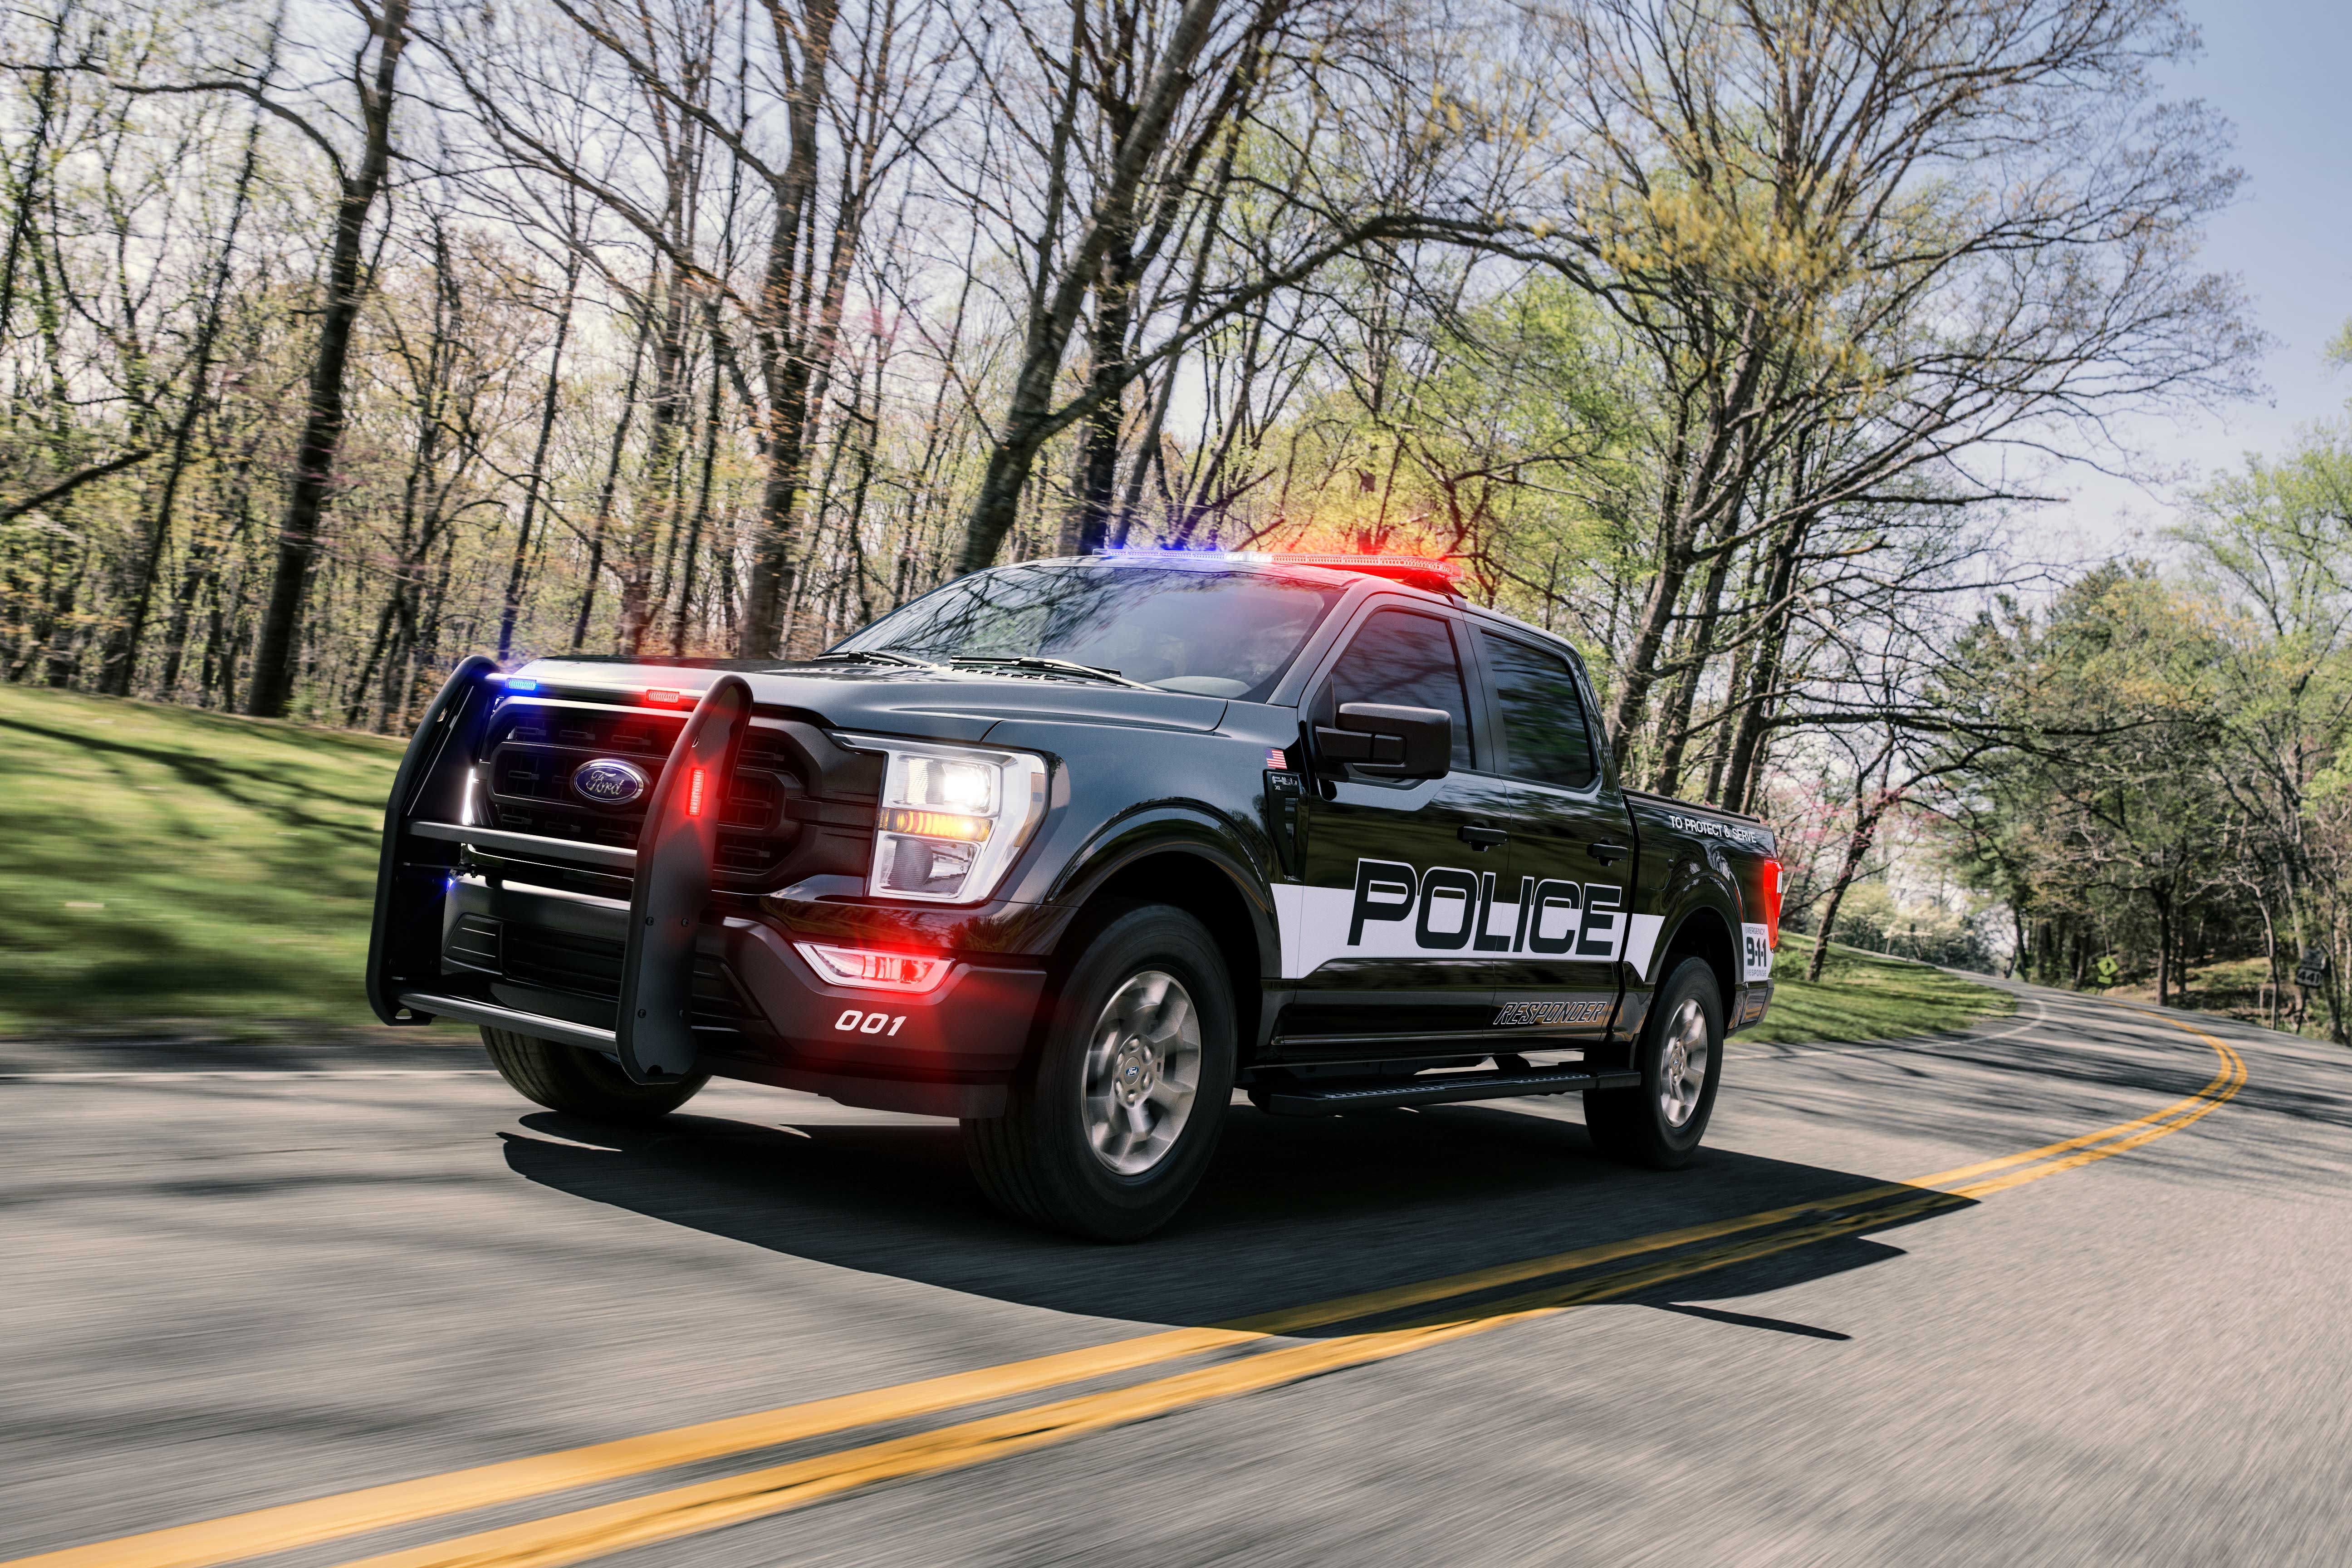 Meet Ford’s new pursuit-rated F-150 pickup for police